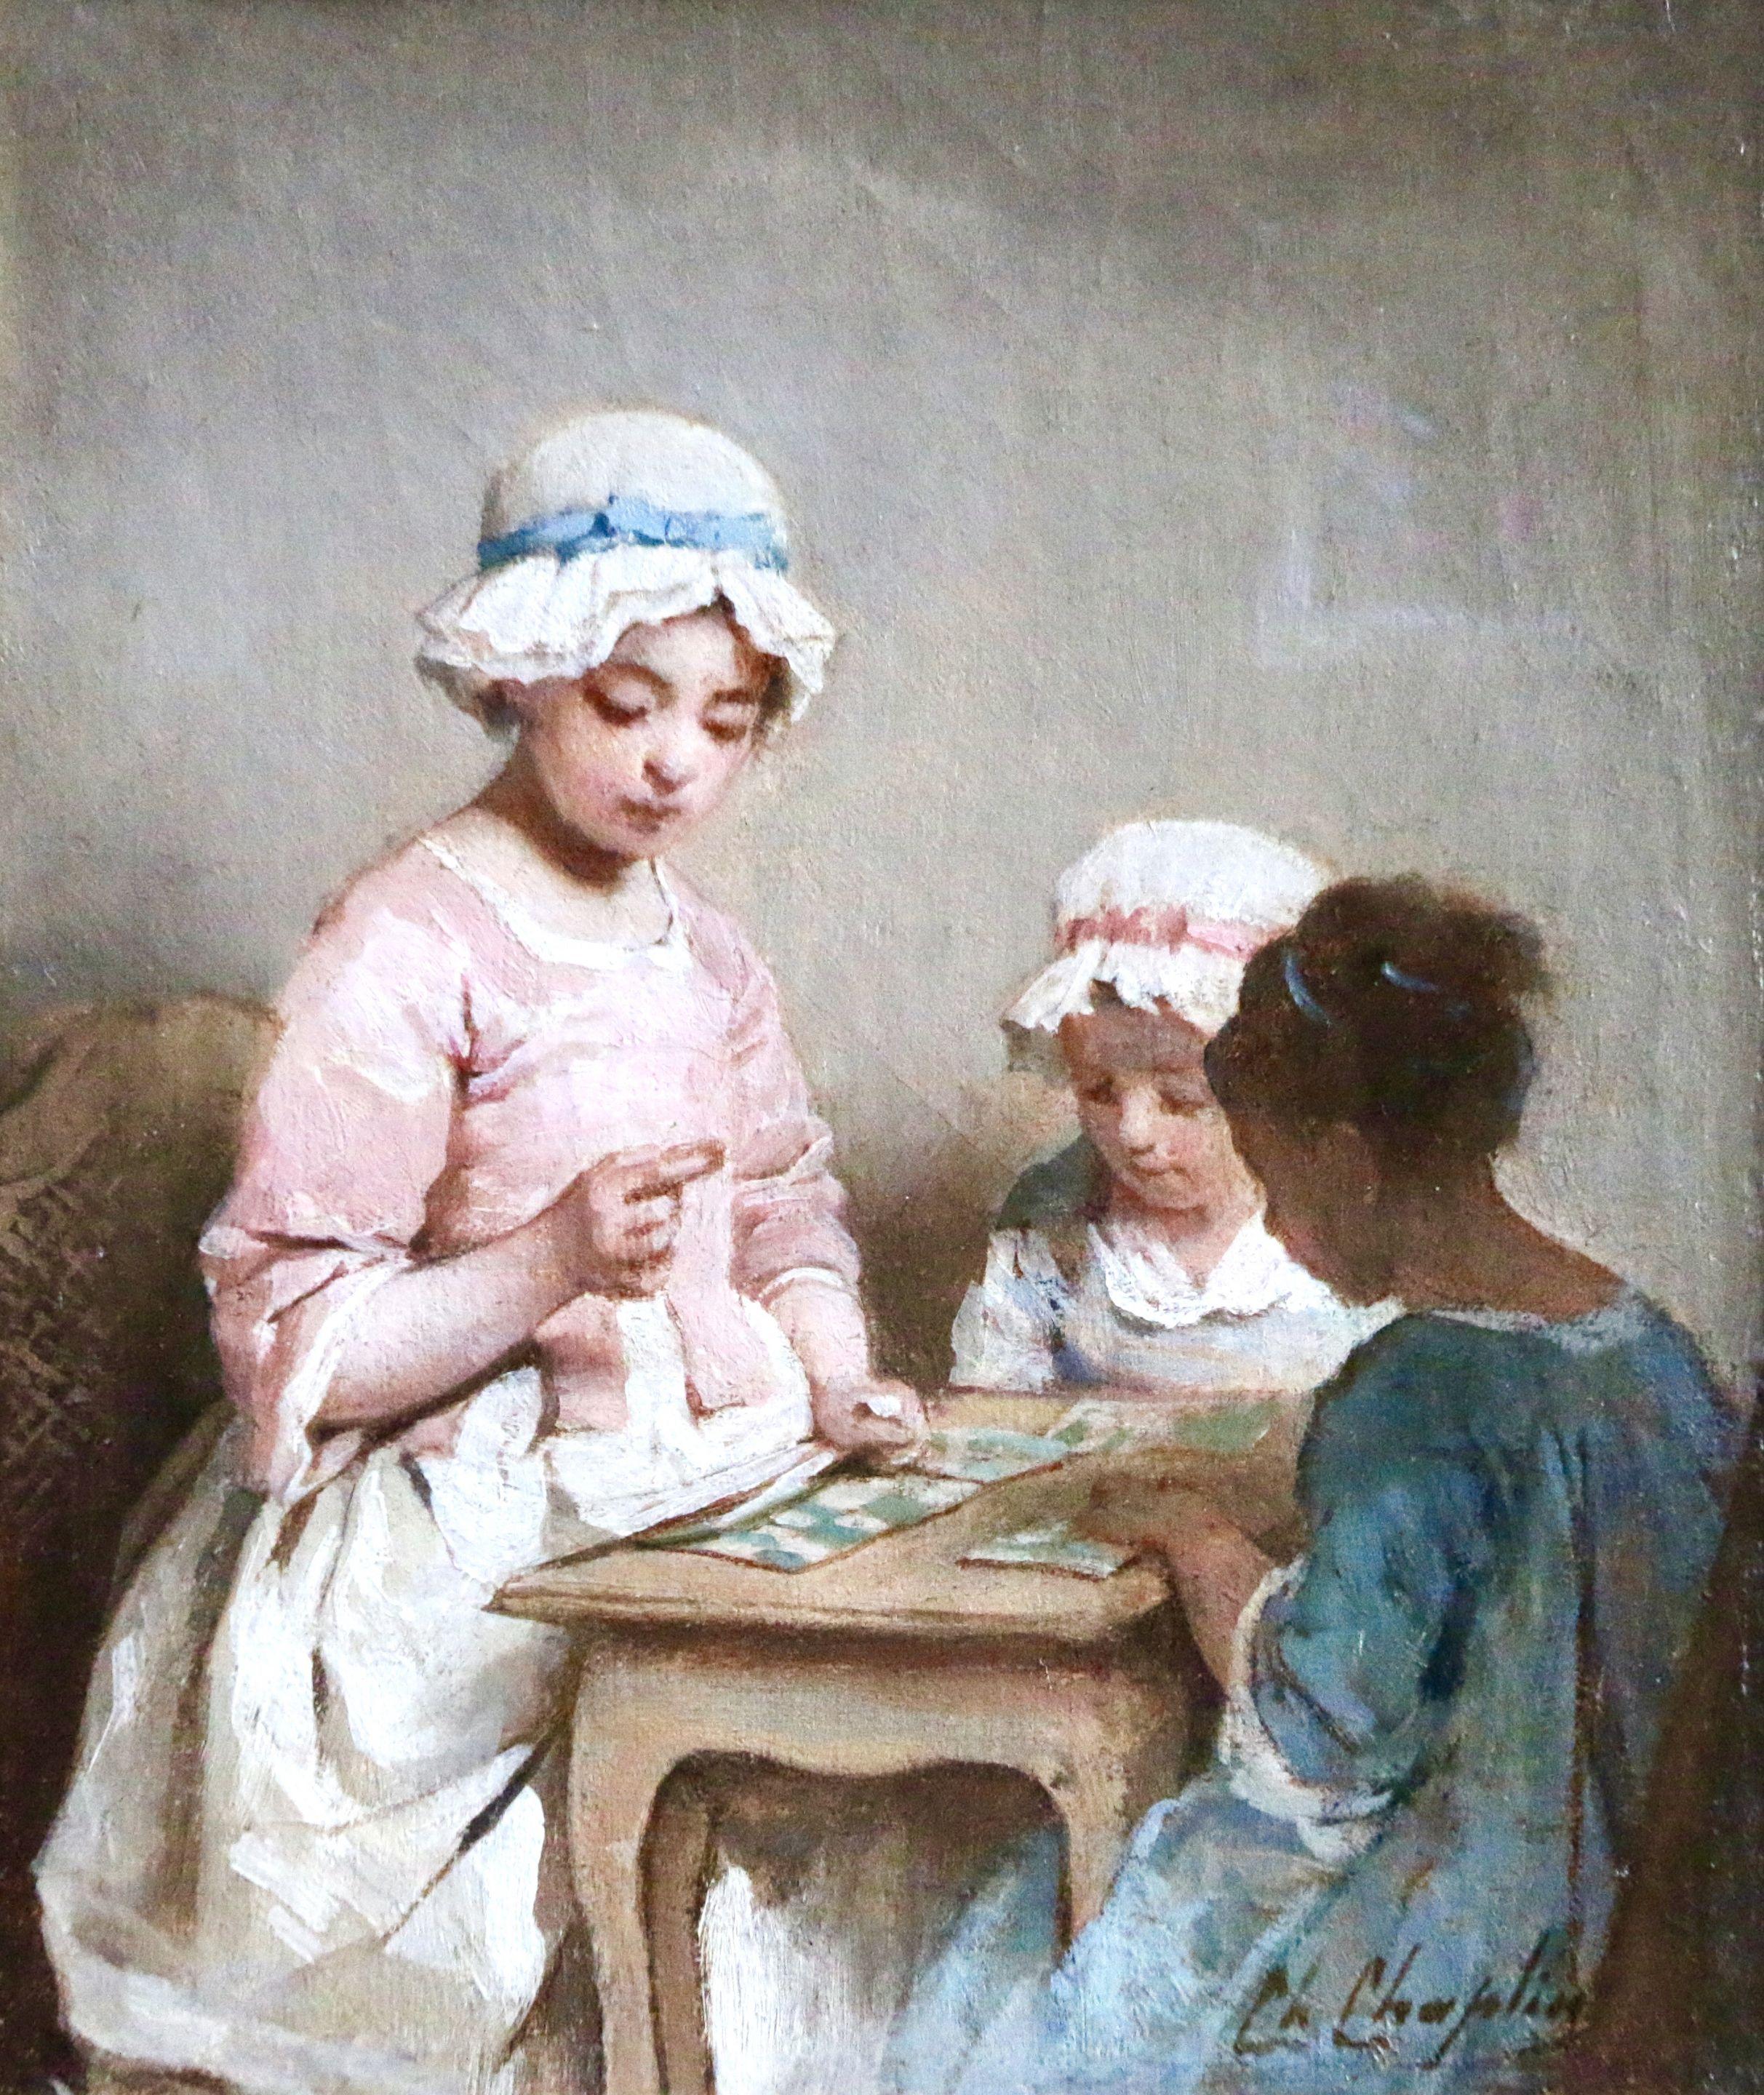 Charles Joshua Chaplin Interior Painting - A Game of Chance - 19th Century Oil, Young Girls Figures in Interior by Chaplin